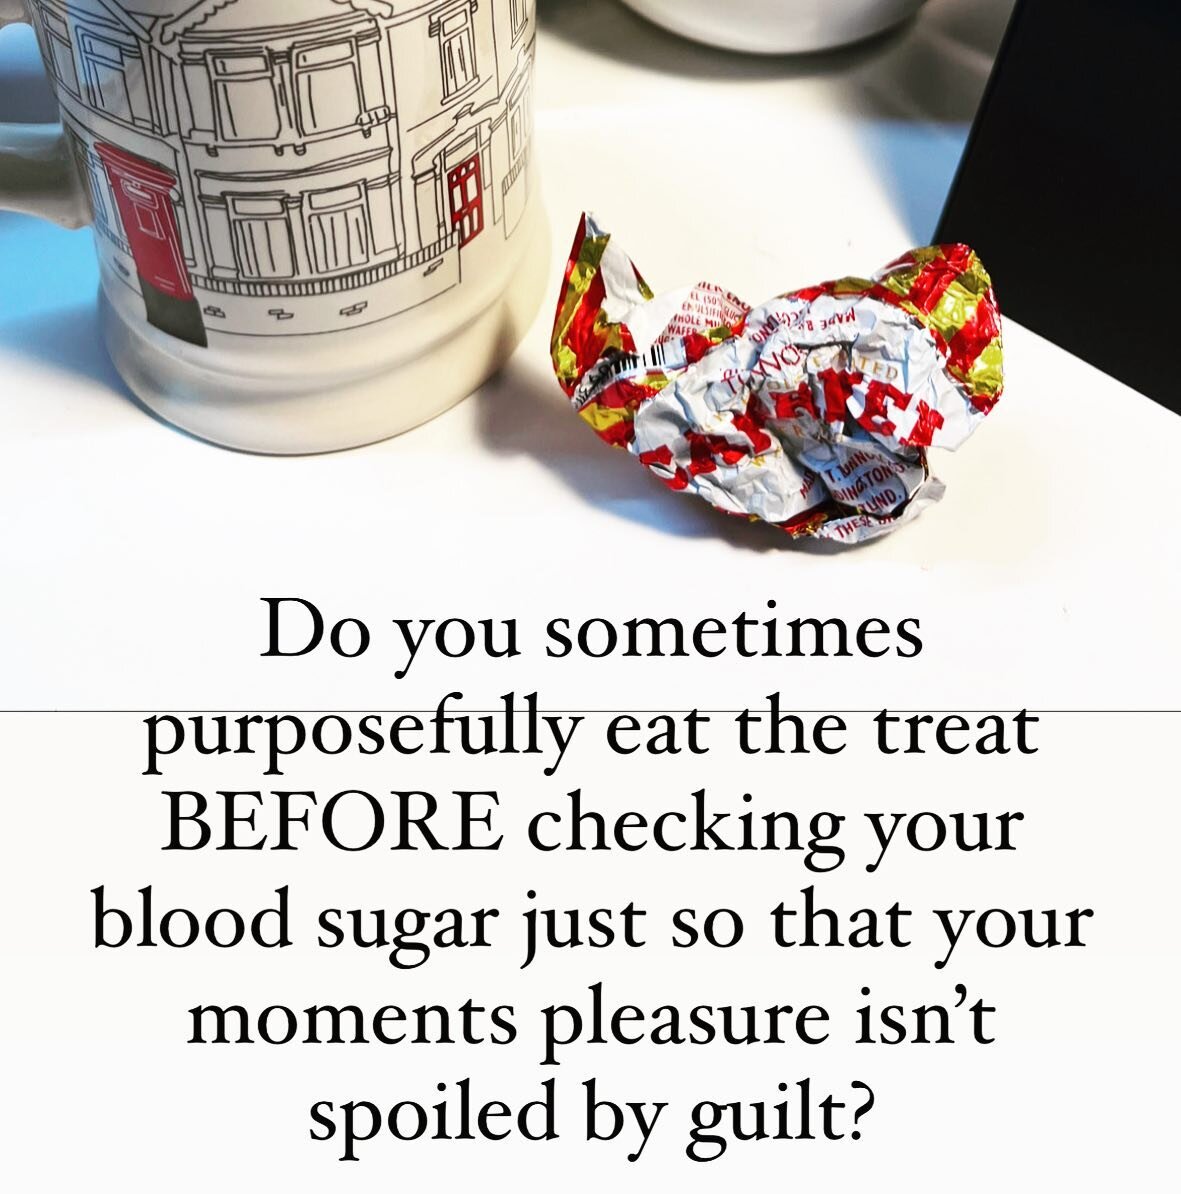 Do you sometimes eat the treat BEFORE checking your blood sugar just so that your moments pleasure isn&rsquo;t spoiled by guilt?

#T1metoo #type1diabetes #type1problems #guiltypleasure